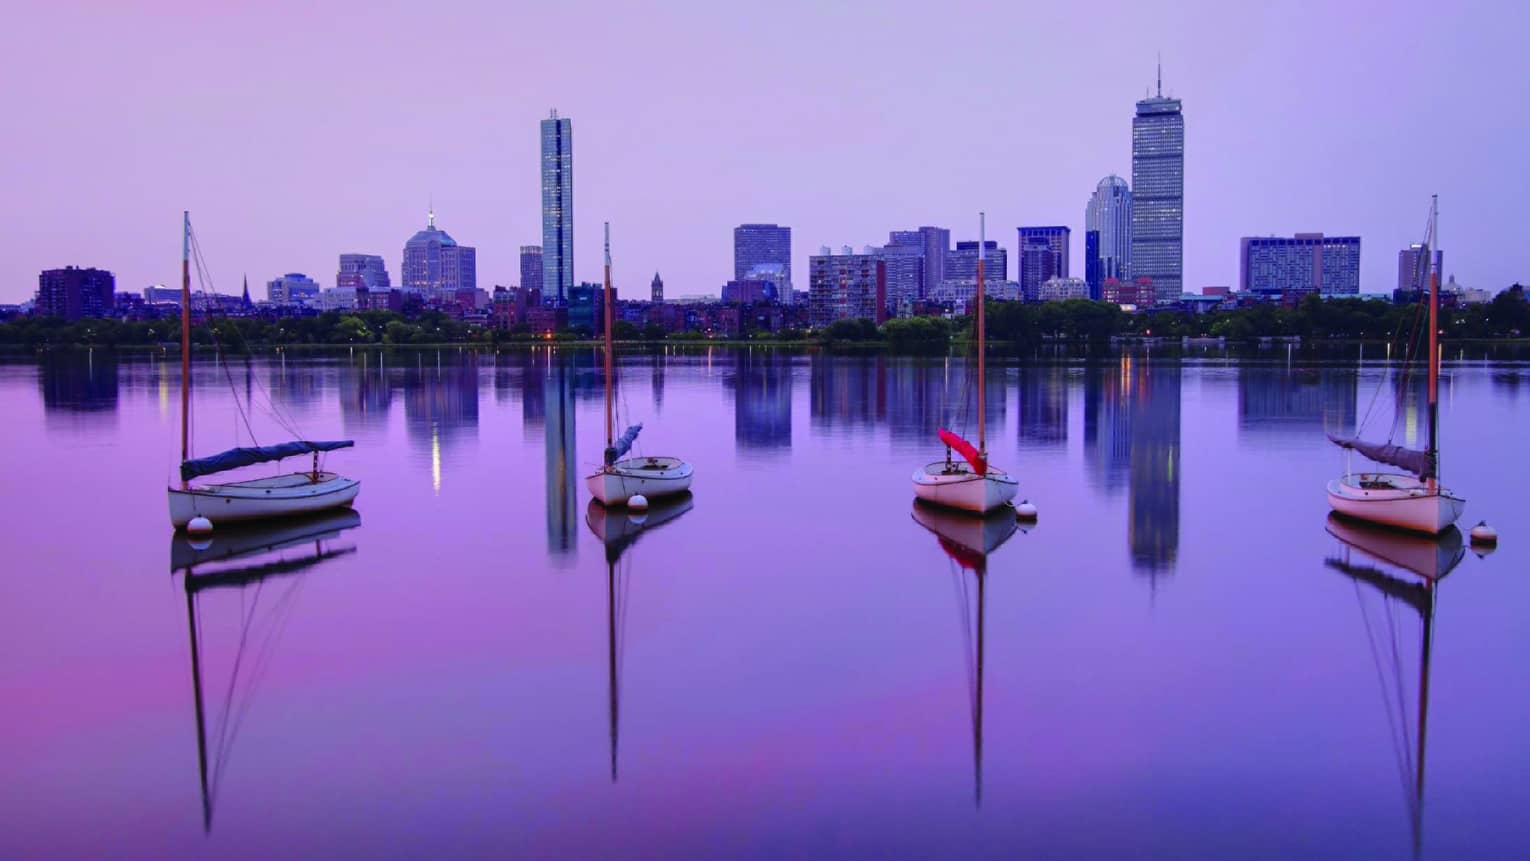 Sailboats parked on the Charles River, Boston skyline in background, purple sunrise 